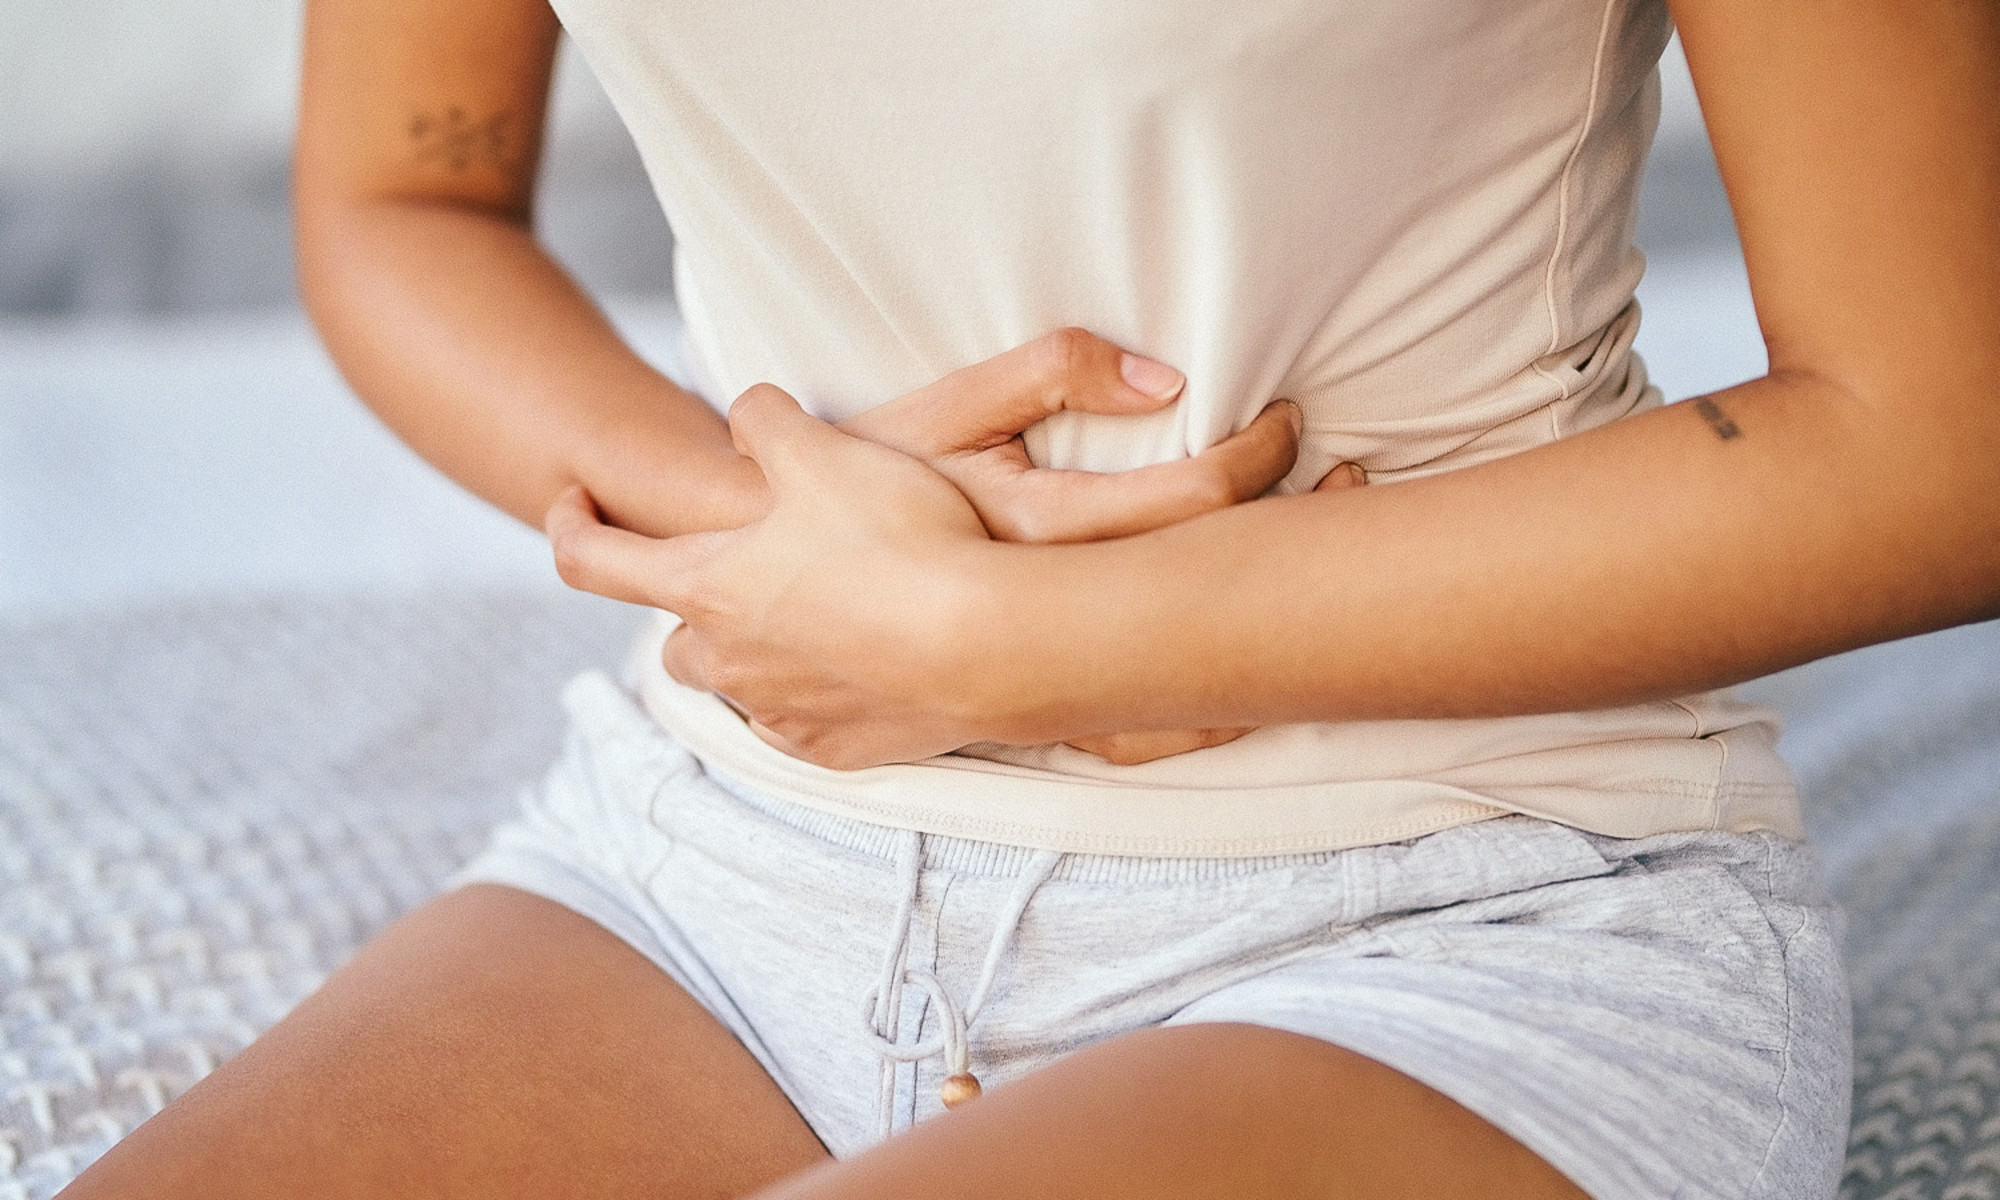 IBS May Be An Early Warning Sign Of This Brain Disorder, Research Suggests